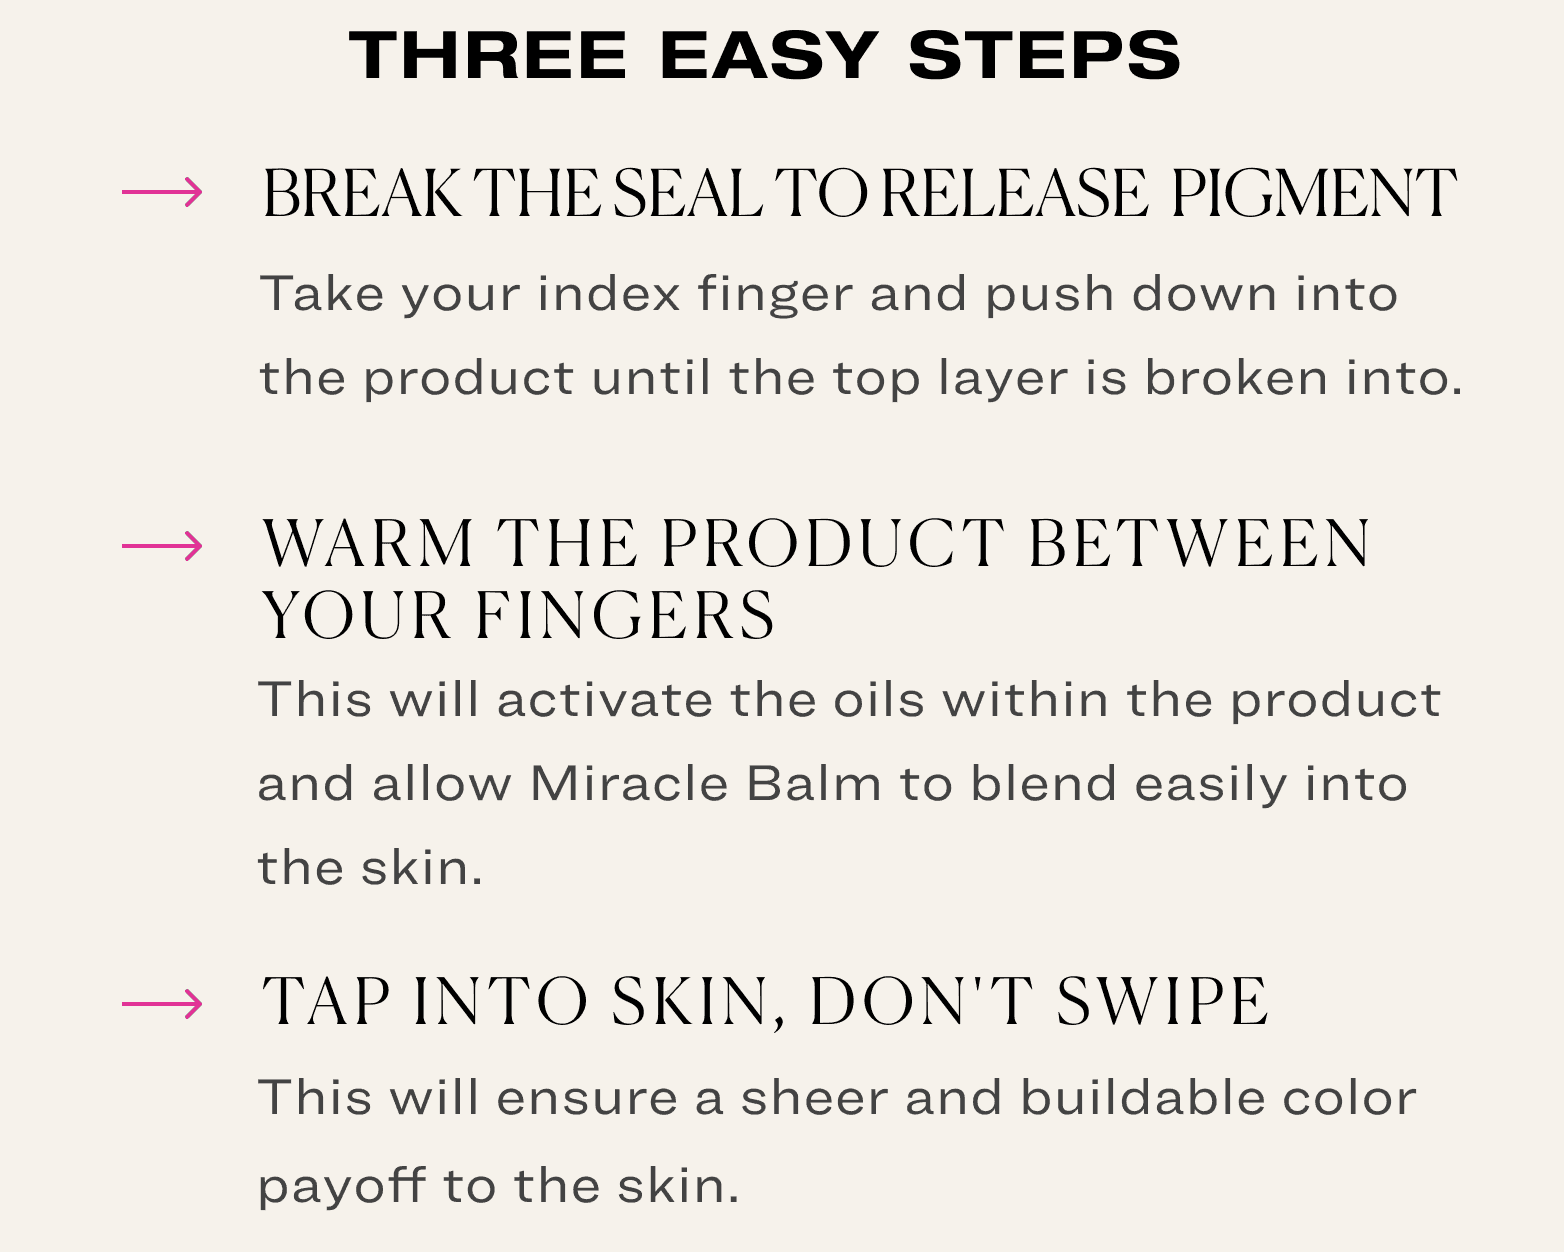 follow these three easy steps